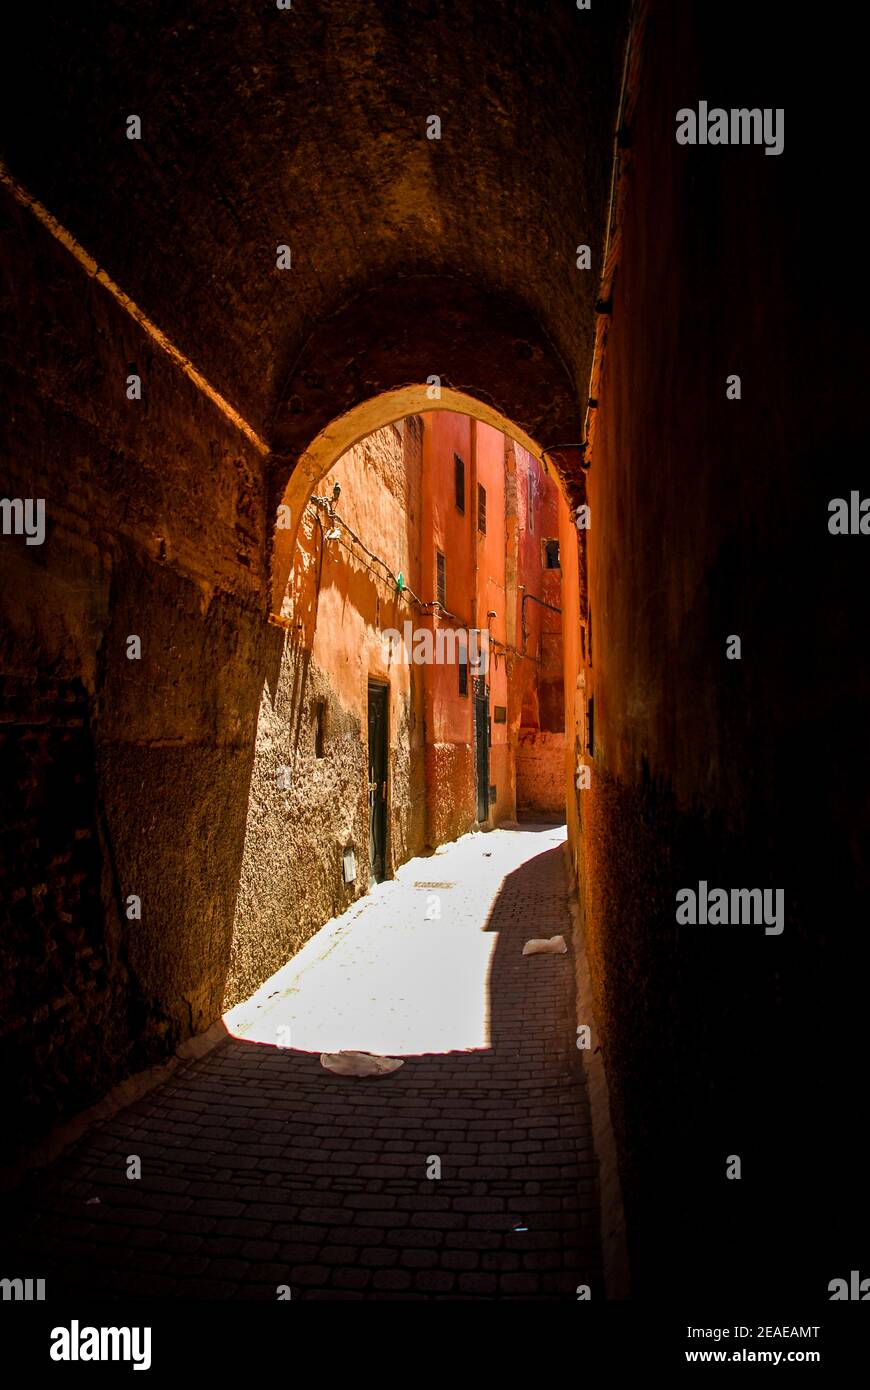 Marrakesh Architecture. High contrast image of deserted alleyway in Marrakesh, Morocco Stock Photo